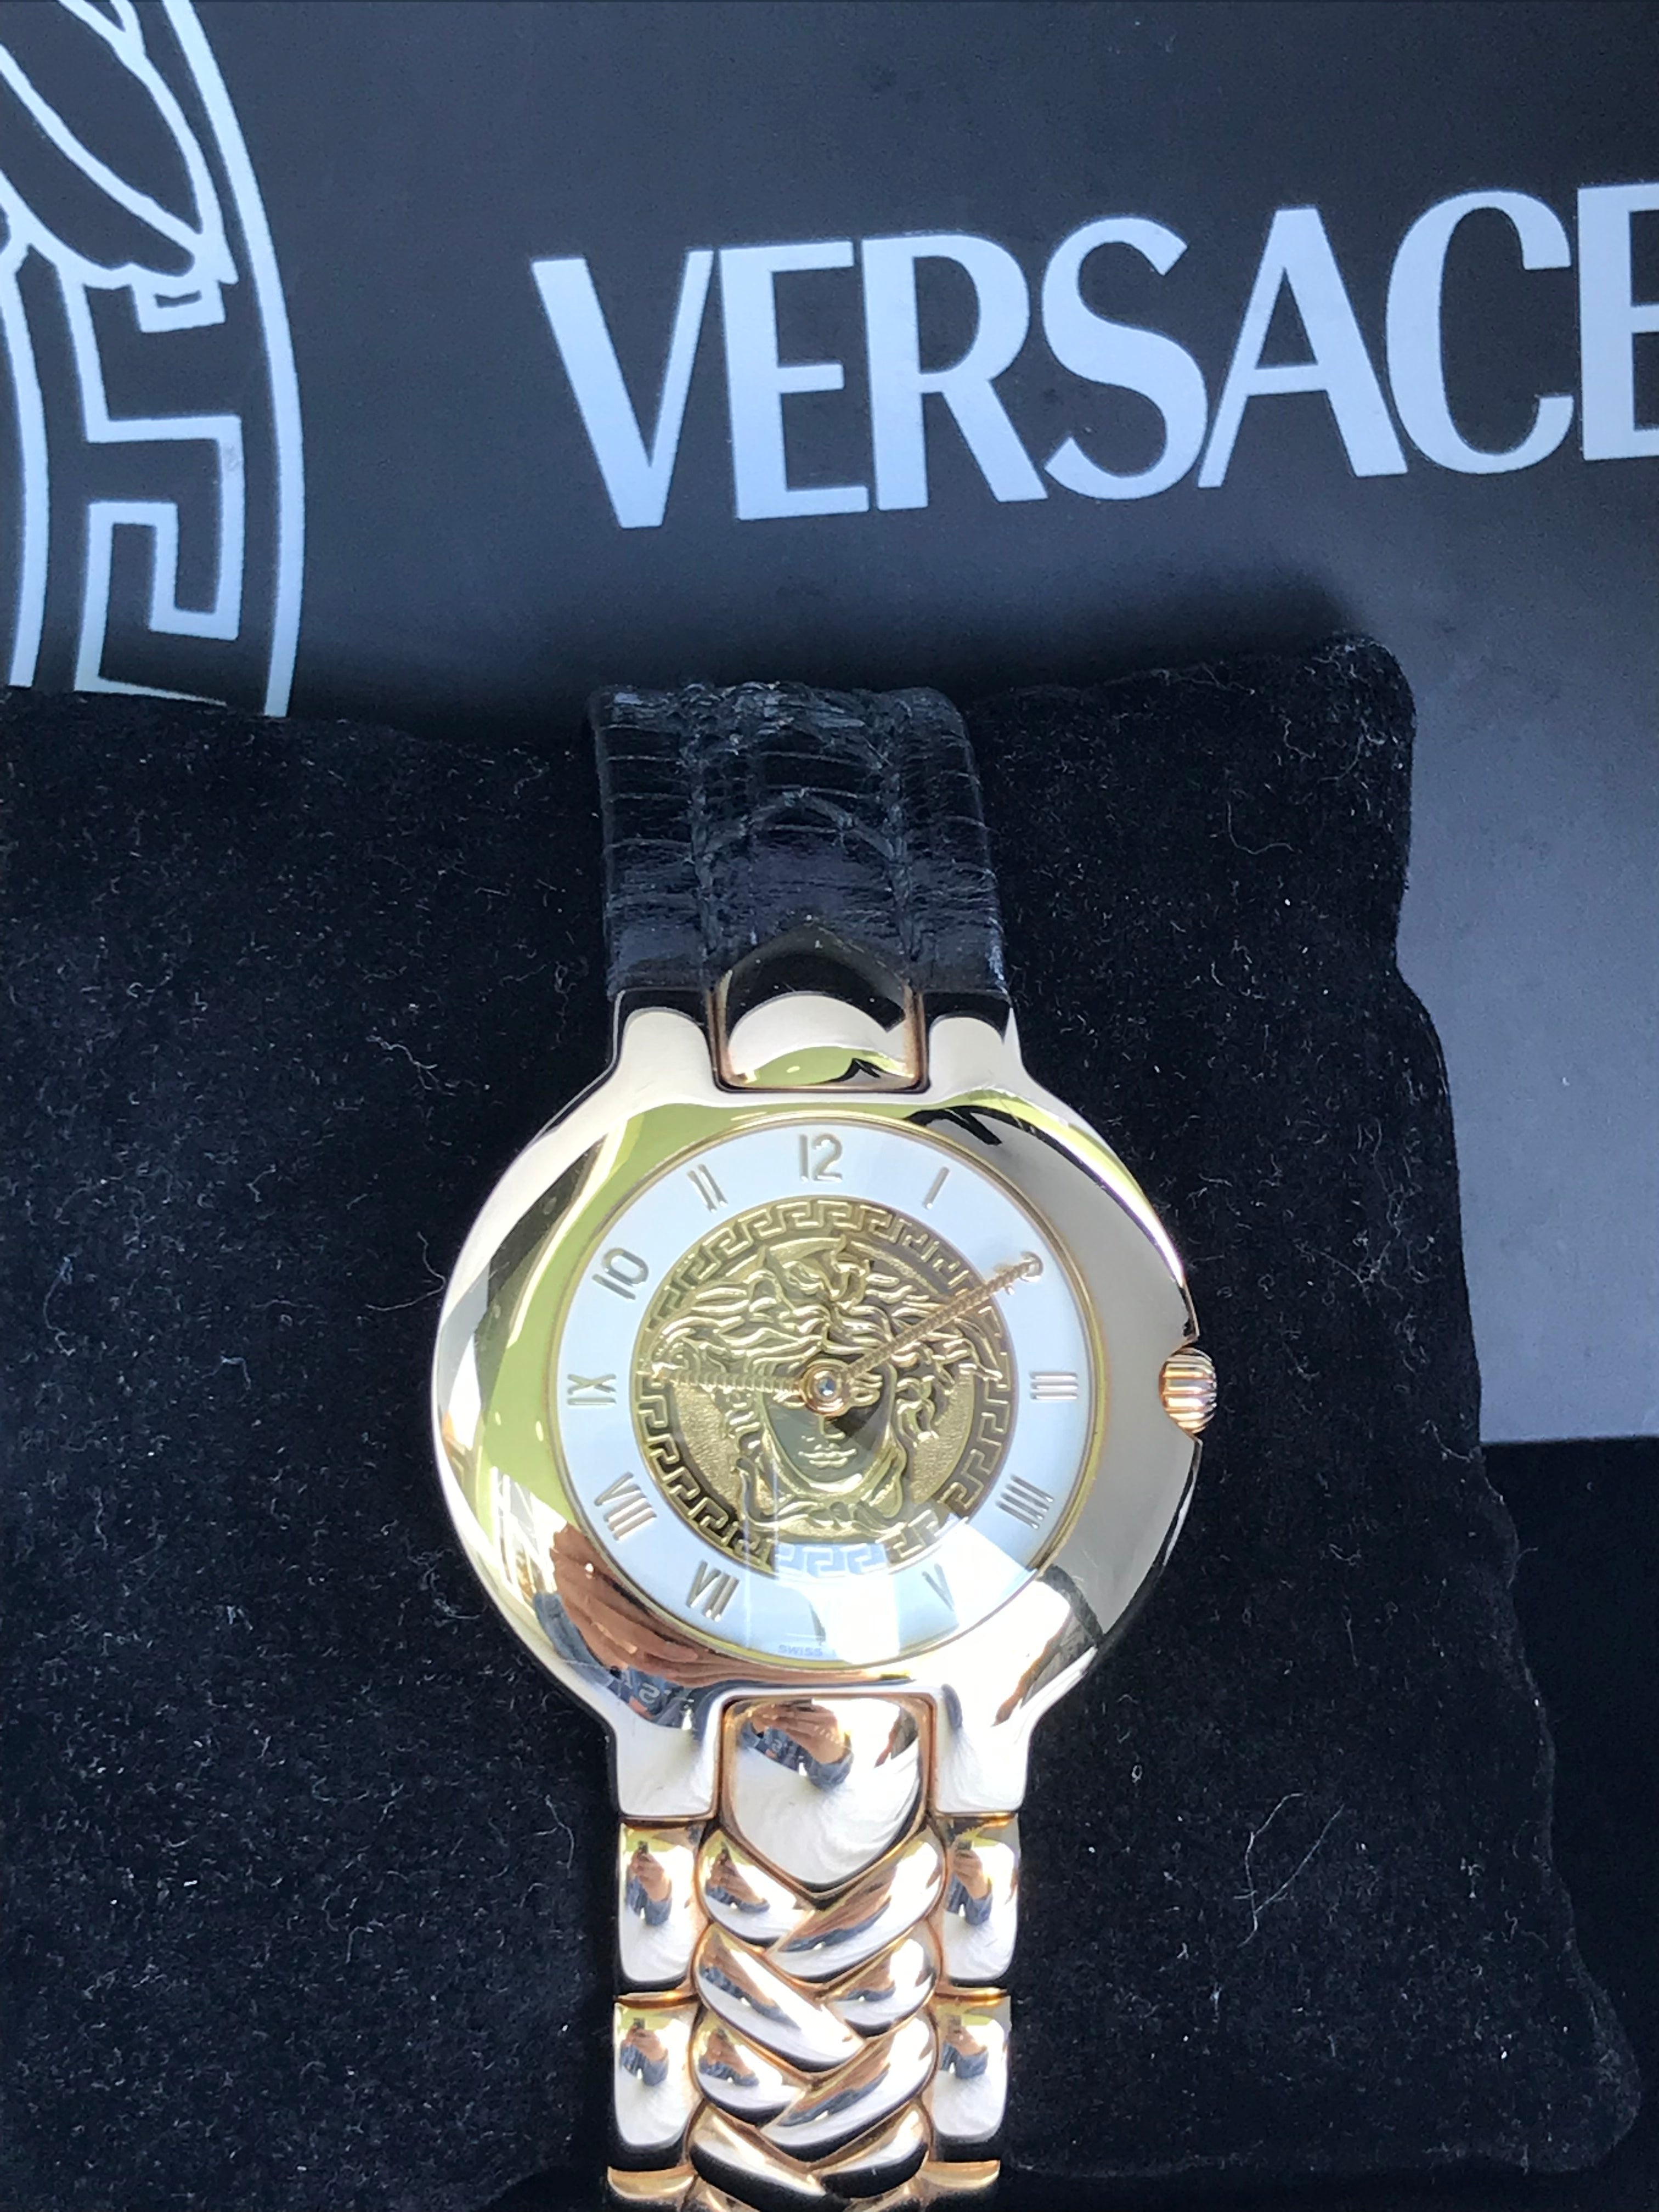 Versace's New Watches Mark 20-Year Tribute To Gianni